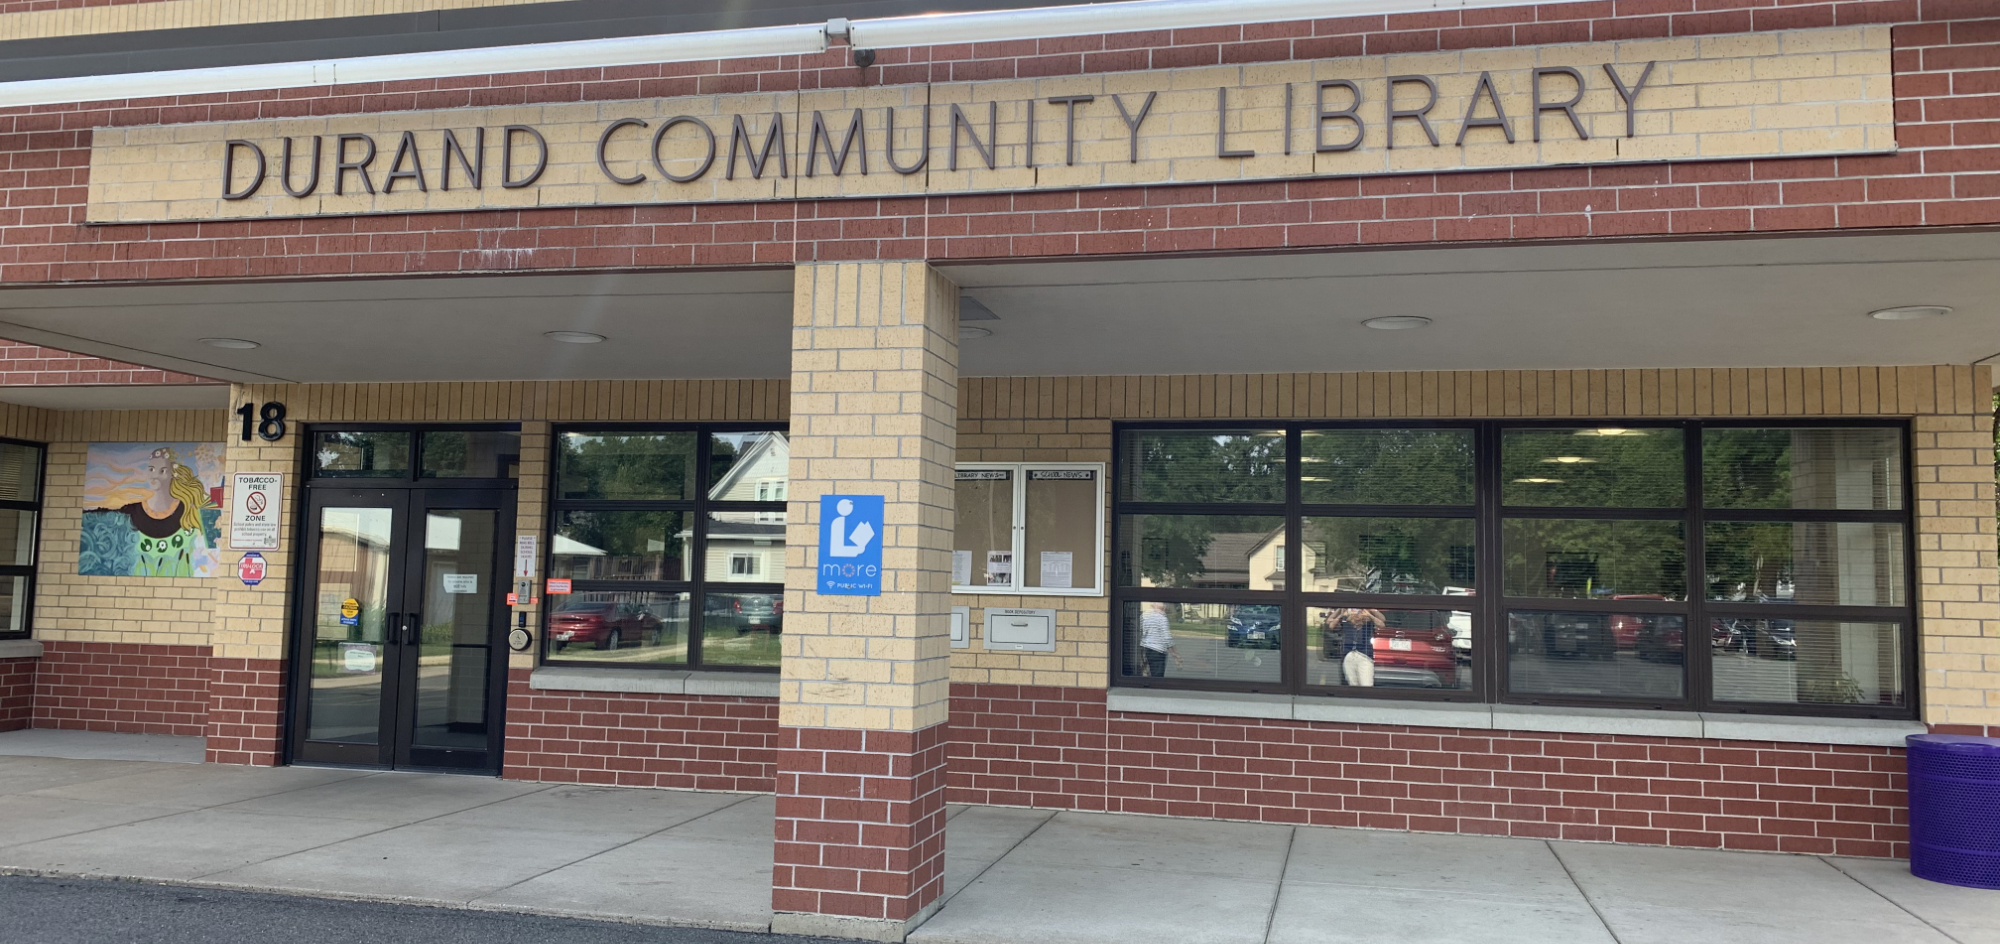 Durand Community Library